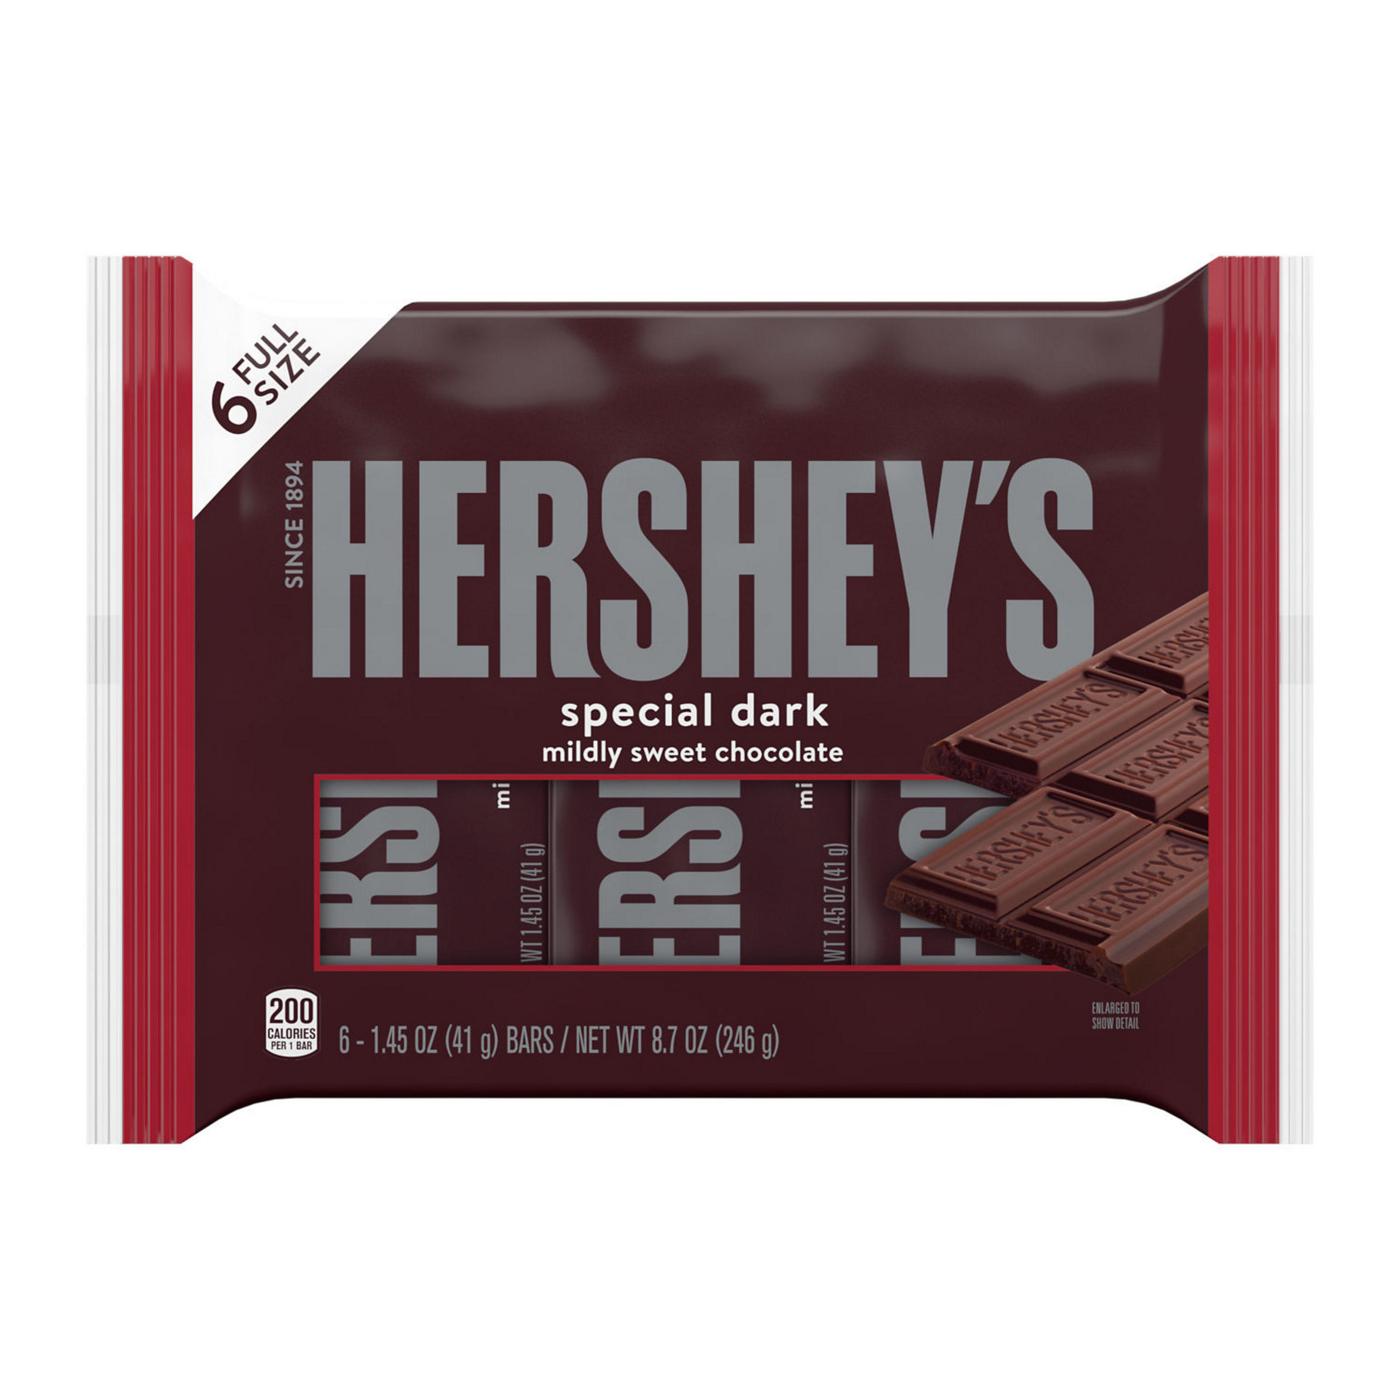 Hershey's Special Dark Mildly Sweet Chocolate Candy Bars; image 1 of 7